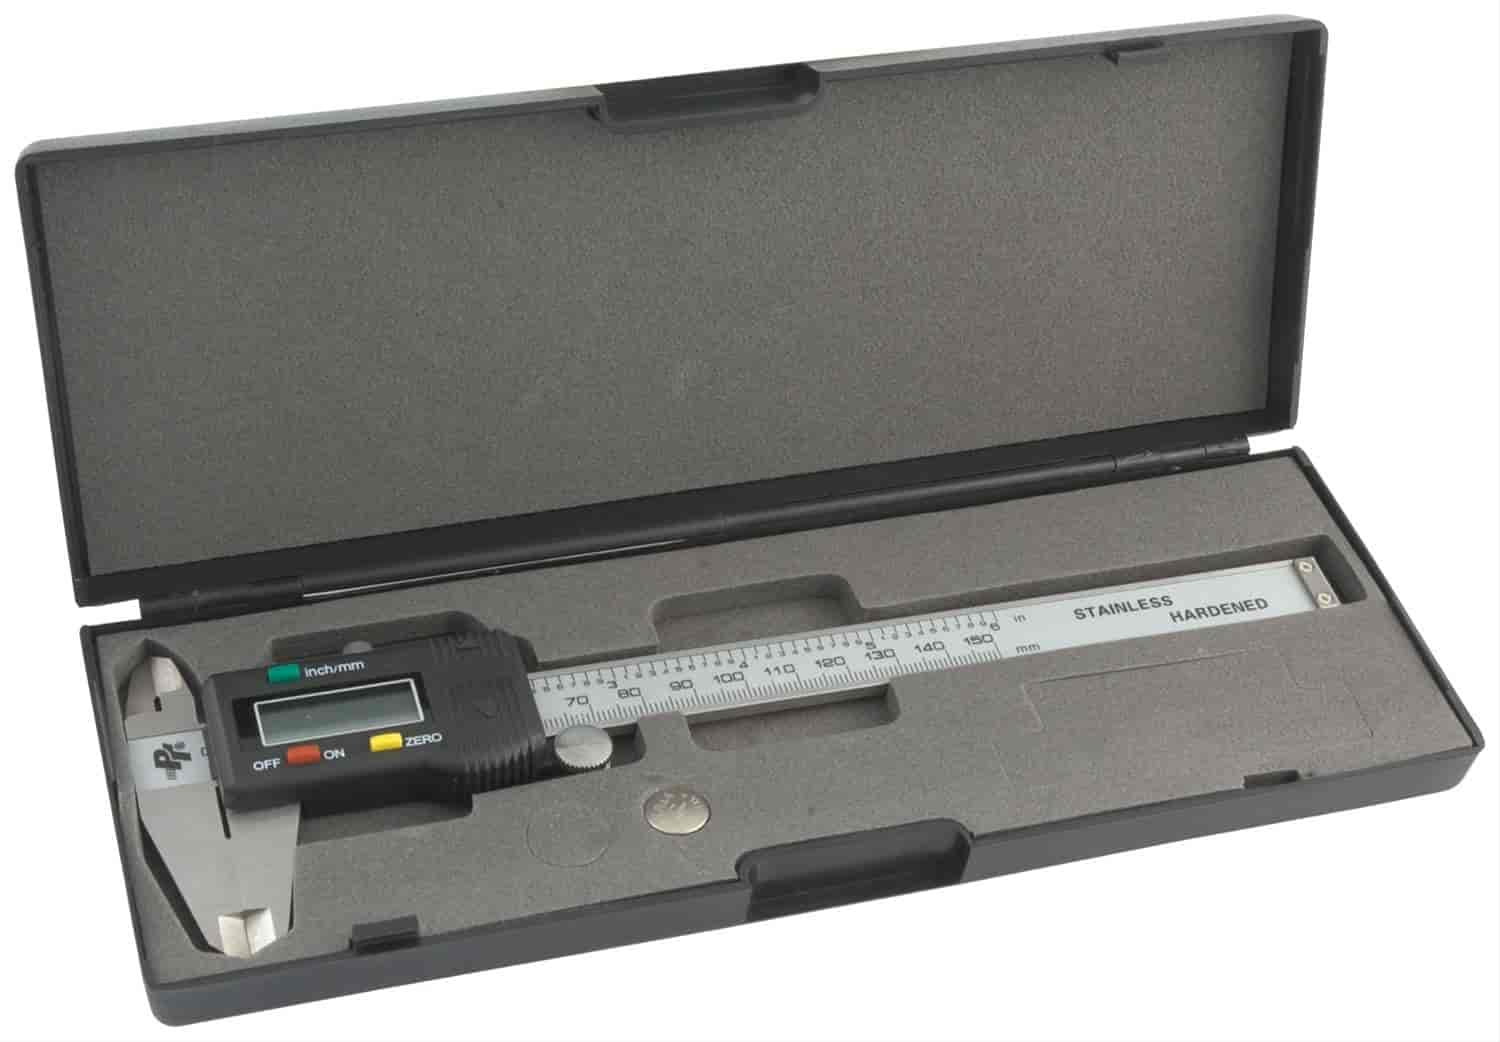 Digital Caliper Measures up to 6" Storage Case Included